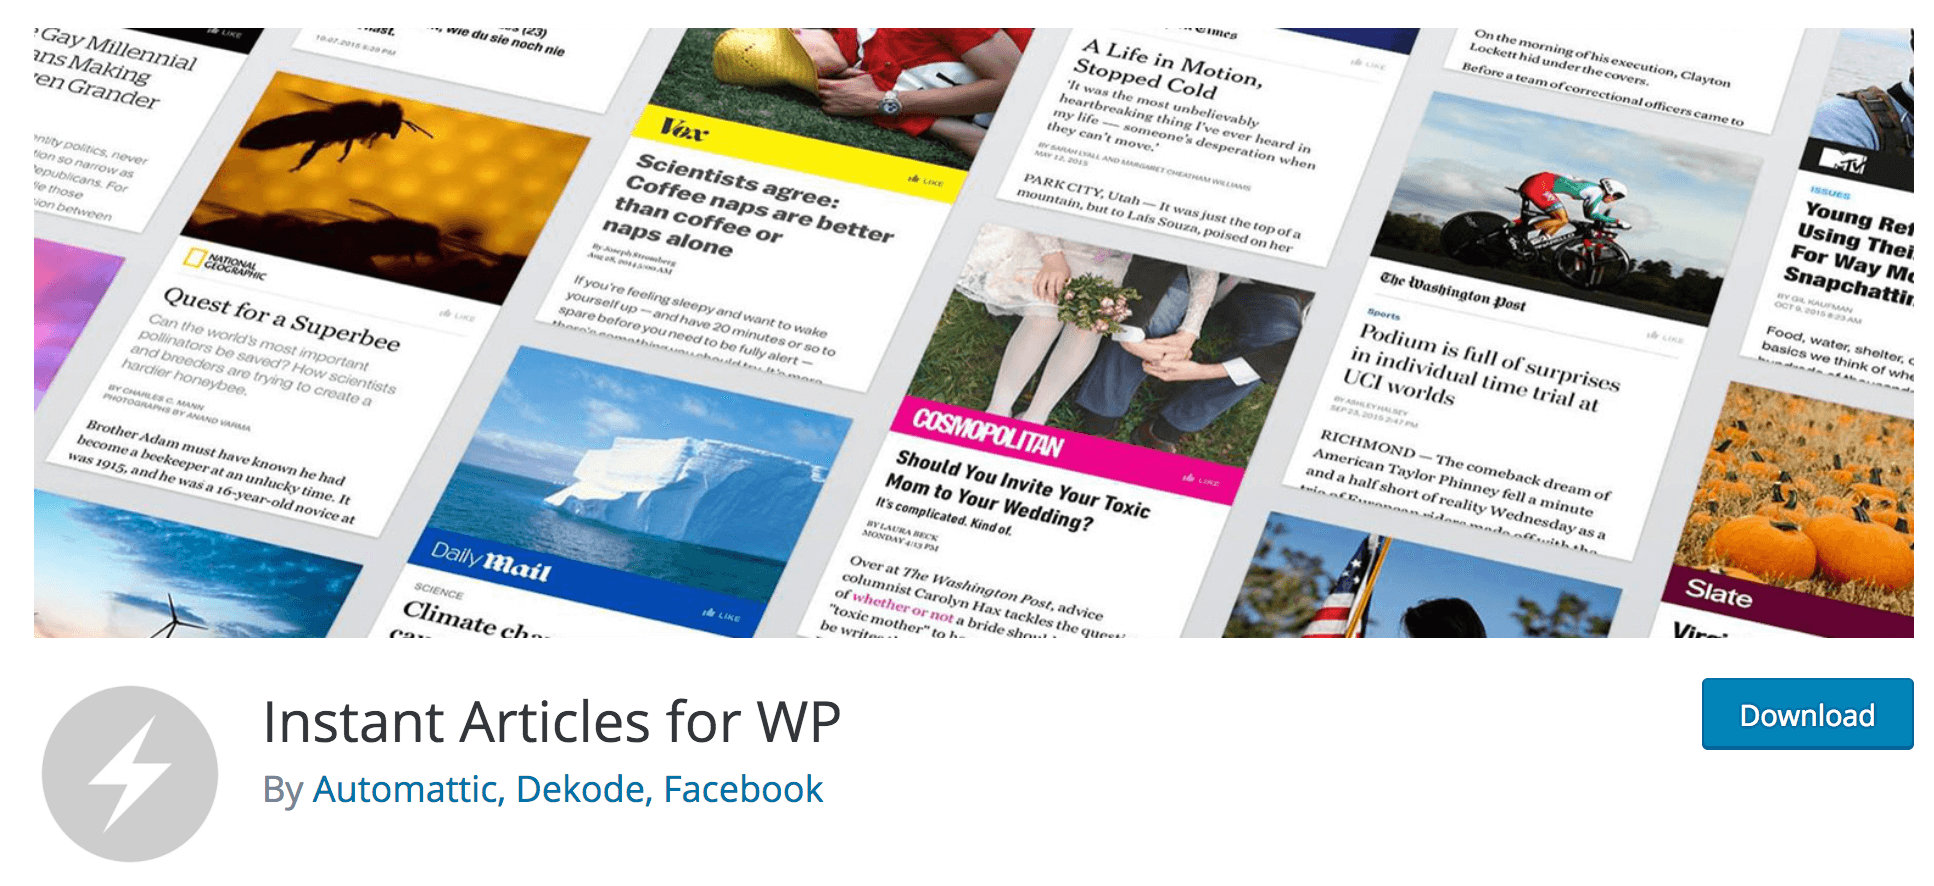 The Instant Articles for WP plugin.